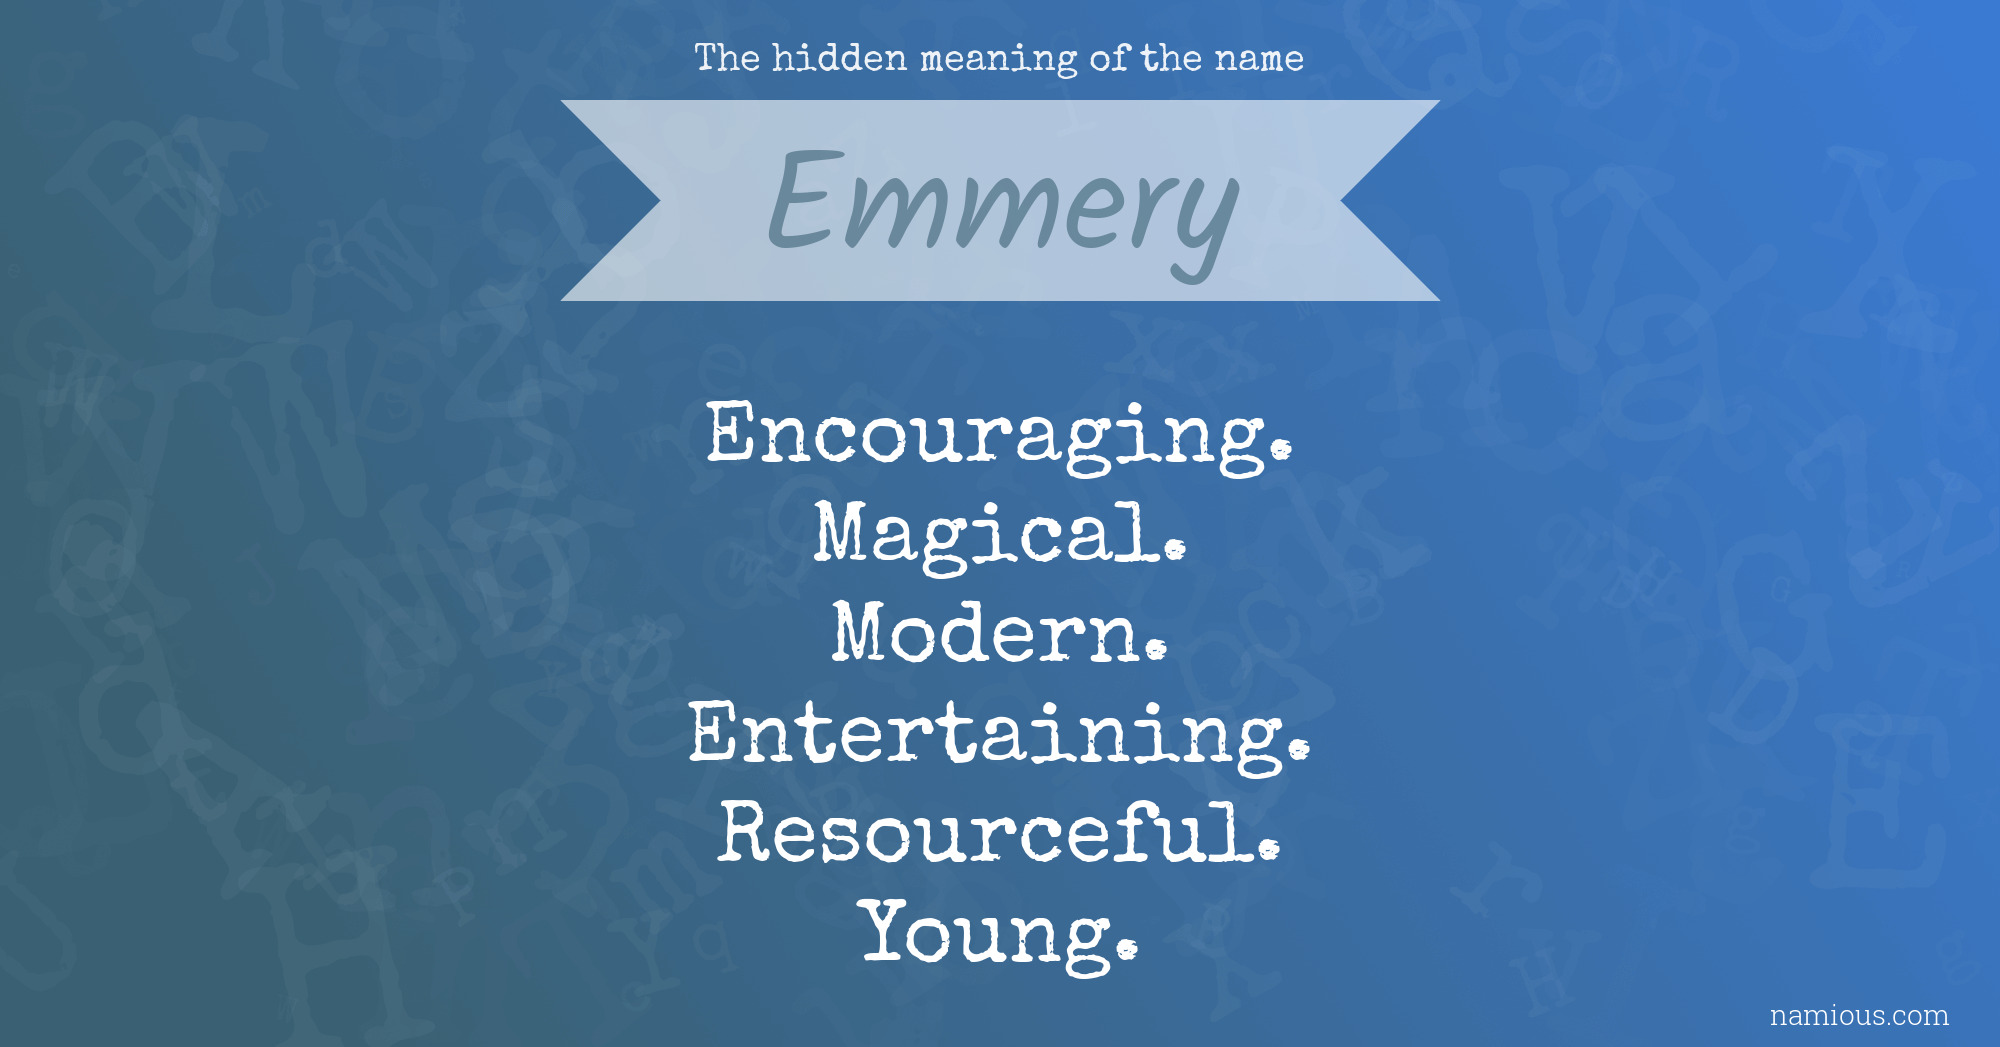 The hidden meaning of the name Emmery